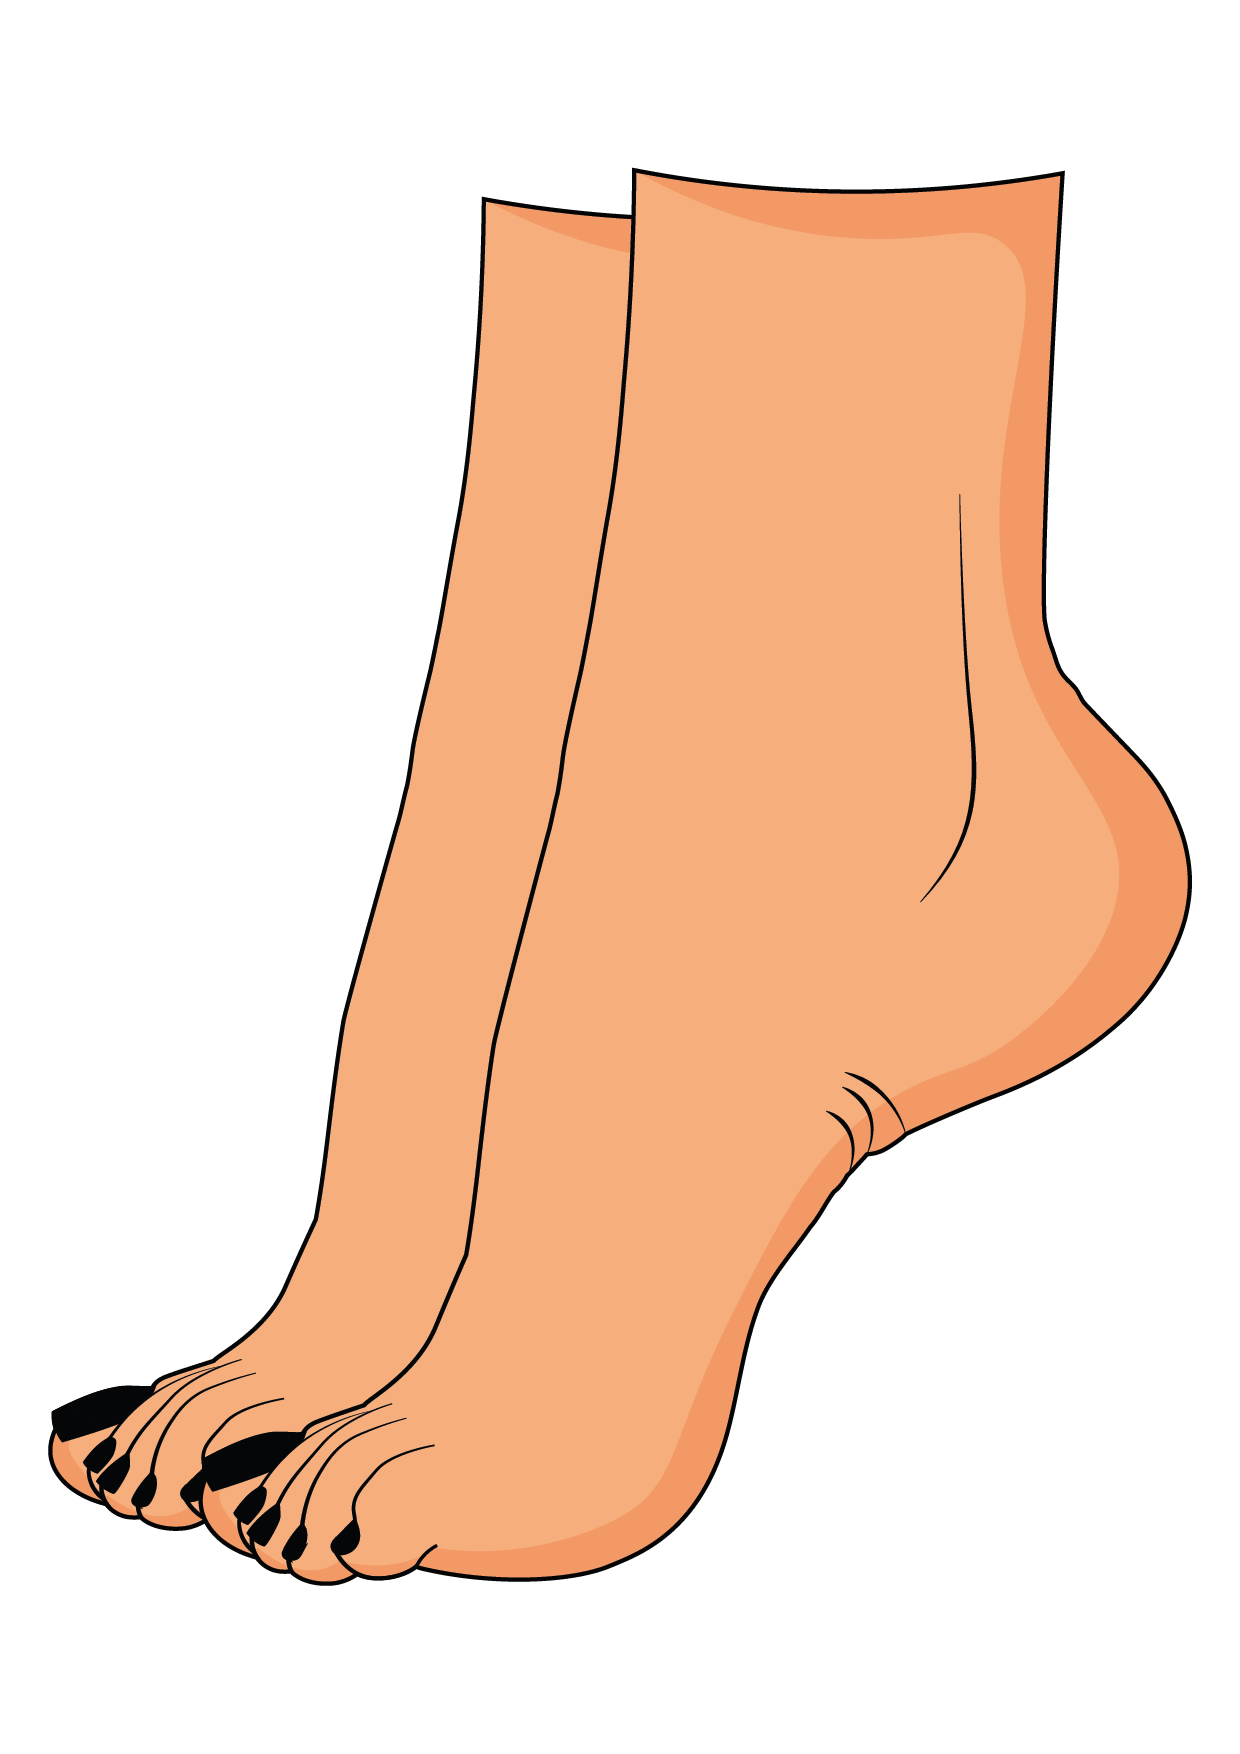 How to Draw A Feet Step by Step Printable